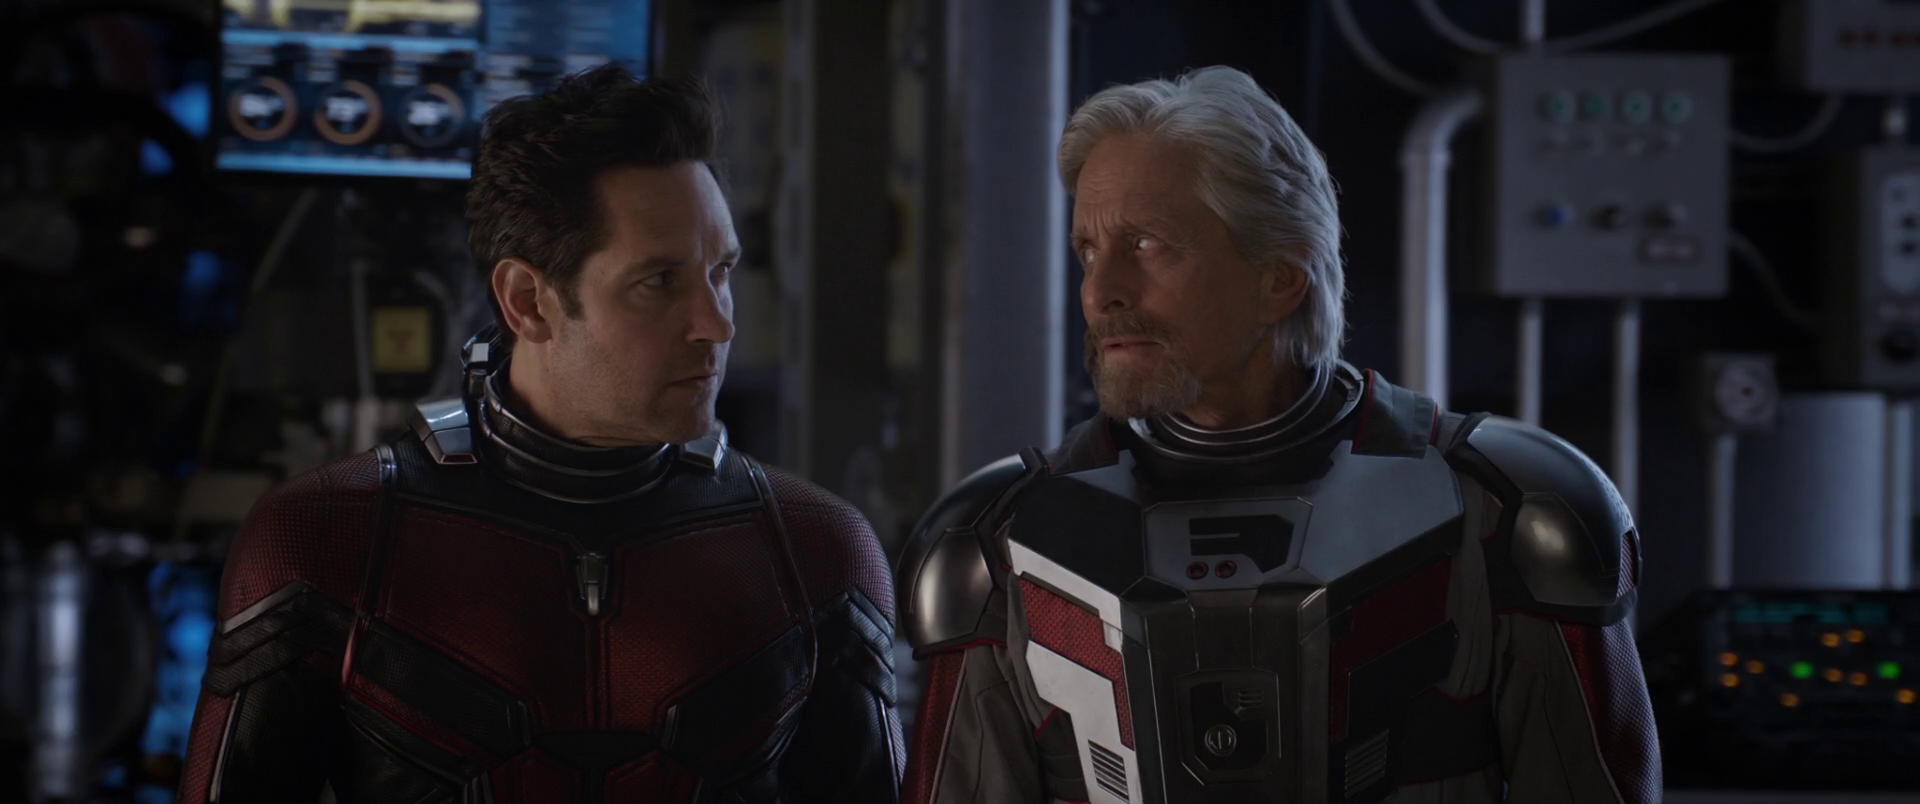 Scott Lang (Paul Rudd) has a question for Hank Pym (Michael Douglas) in Ant-Man and the Wasp (2018), Marvel Entertainment